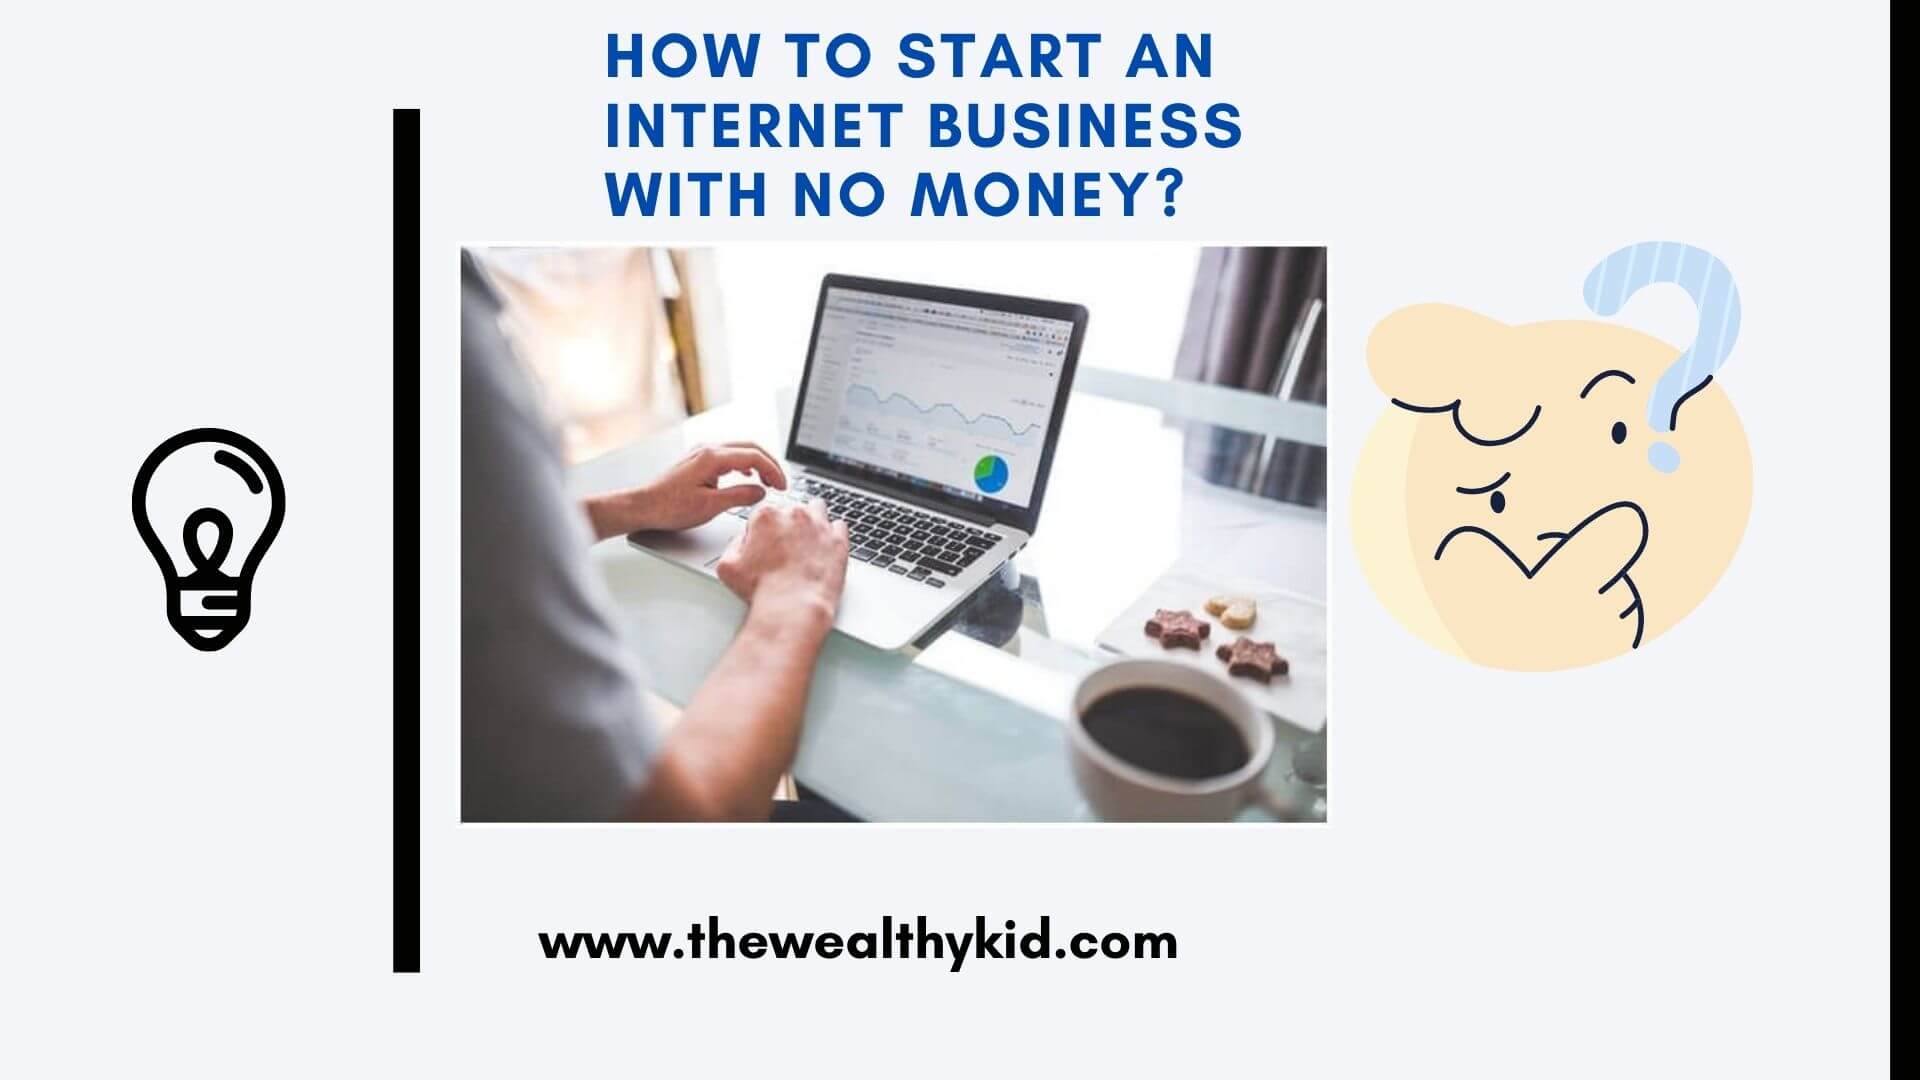 How To Start An Internet Business With No Money?